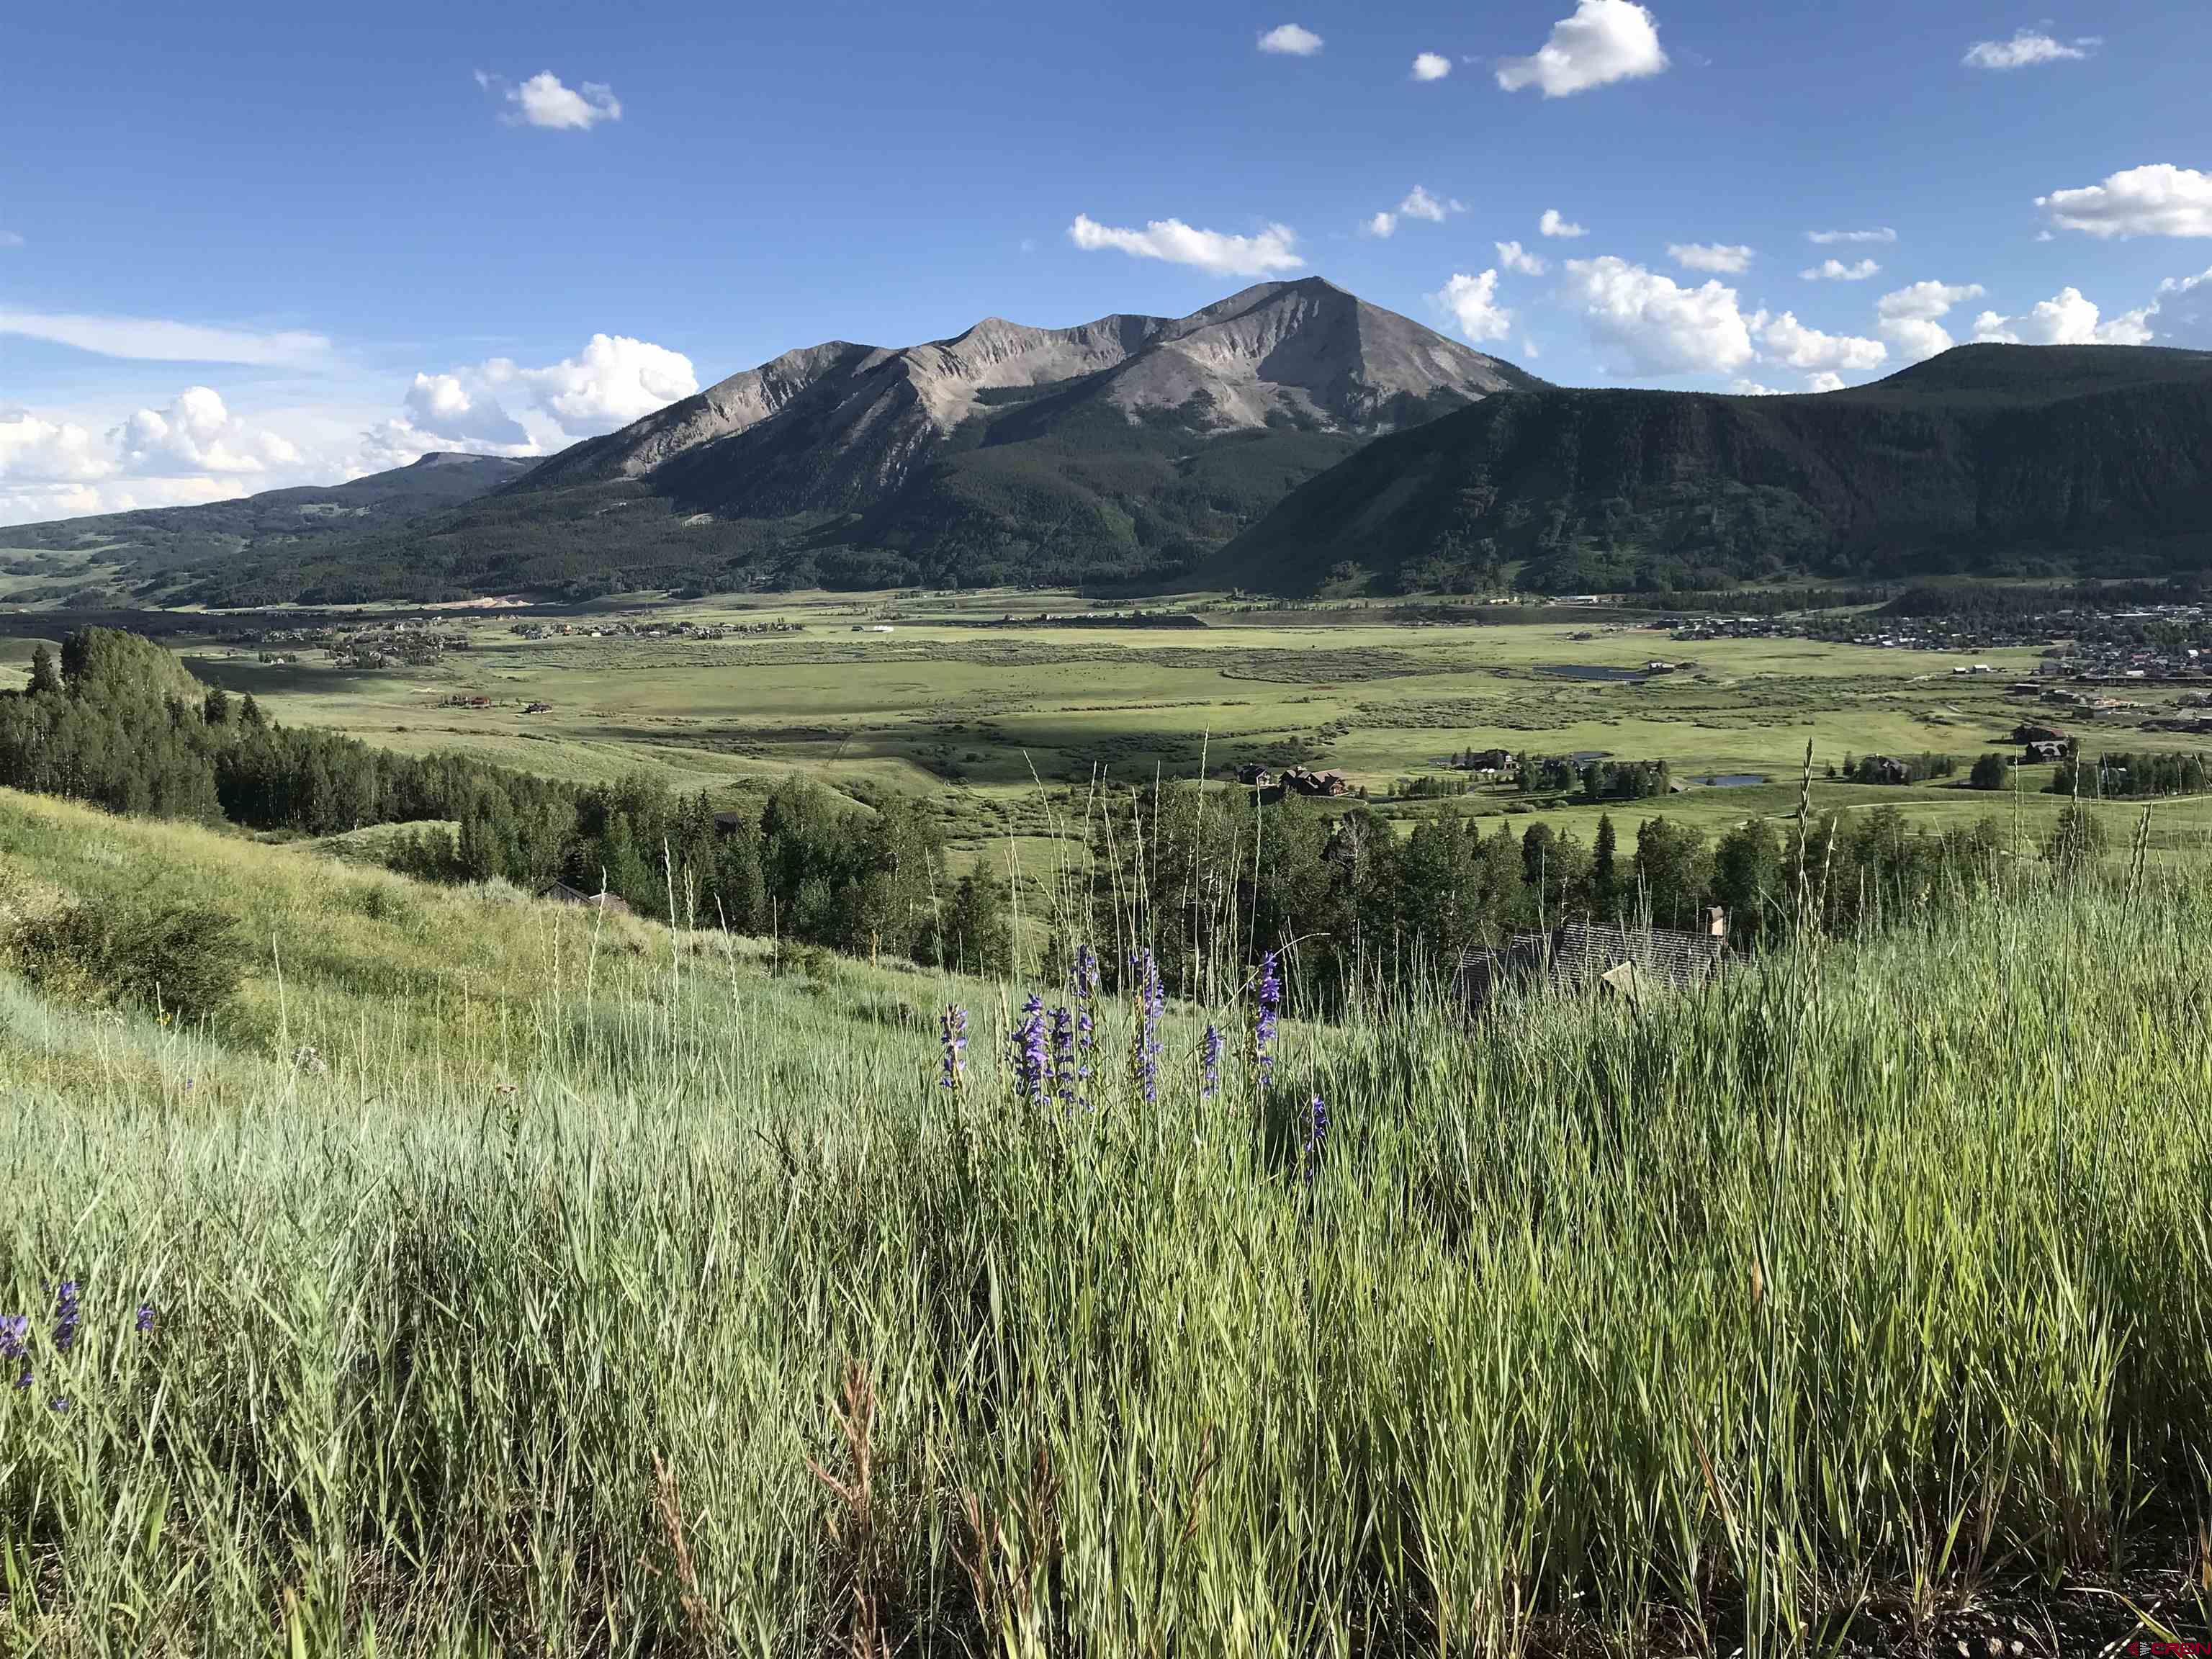 35 Overlook Drive, Mt. Crested Butte, CO 81225